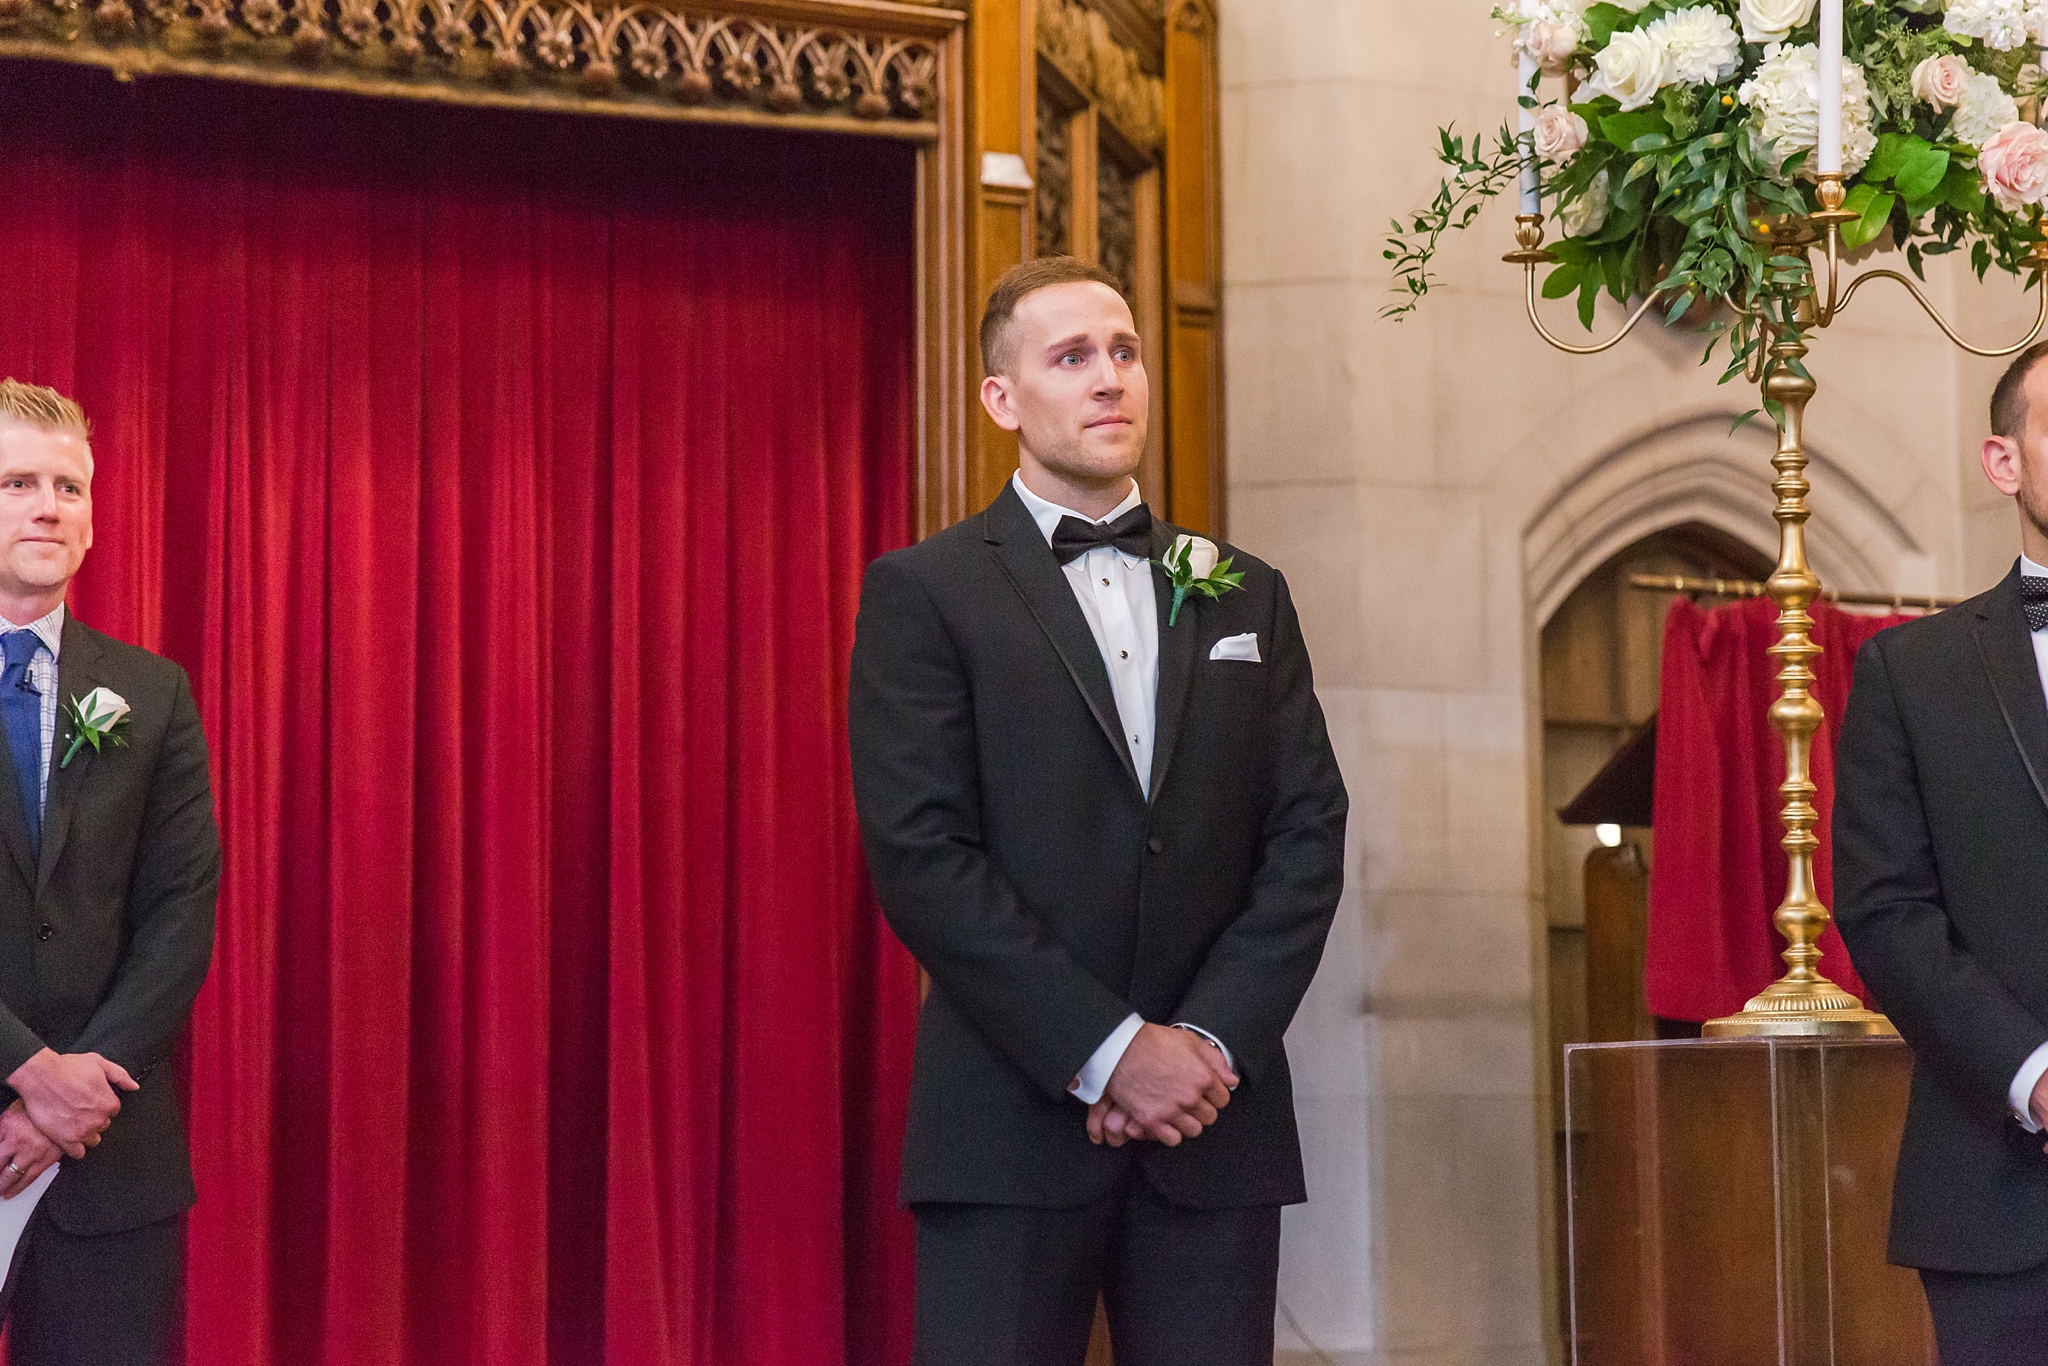 candid-romantic-wedding-photos-at-the-masonic-temple-belle-isle-detroit-institute-of-arts-in-detroit-michigan-by-courtney-carolyn-photography_0070.jpg